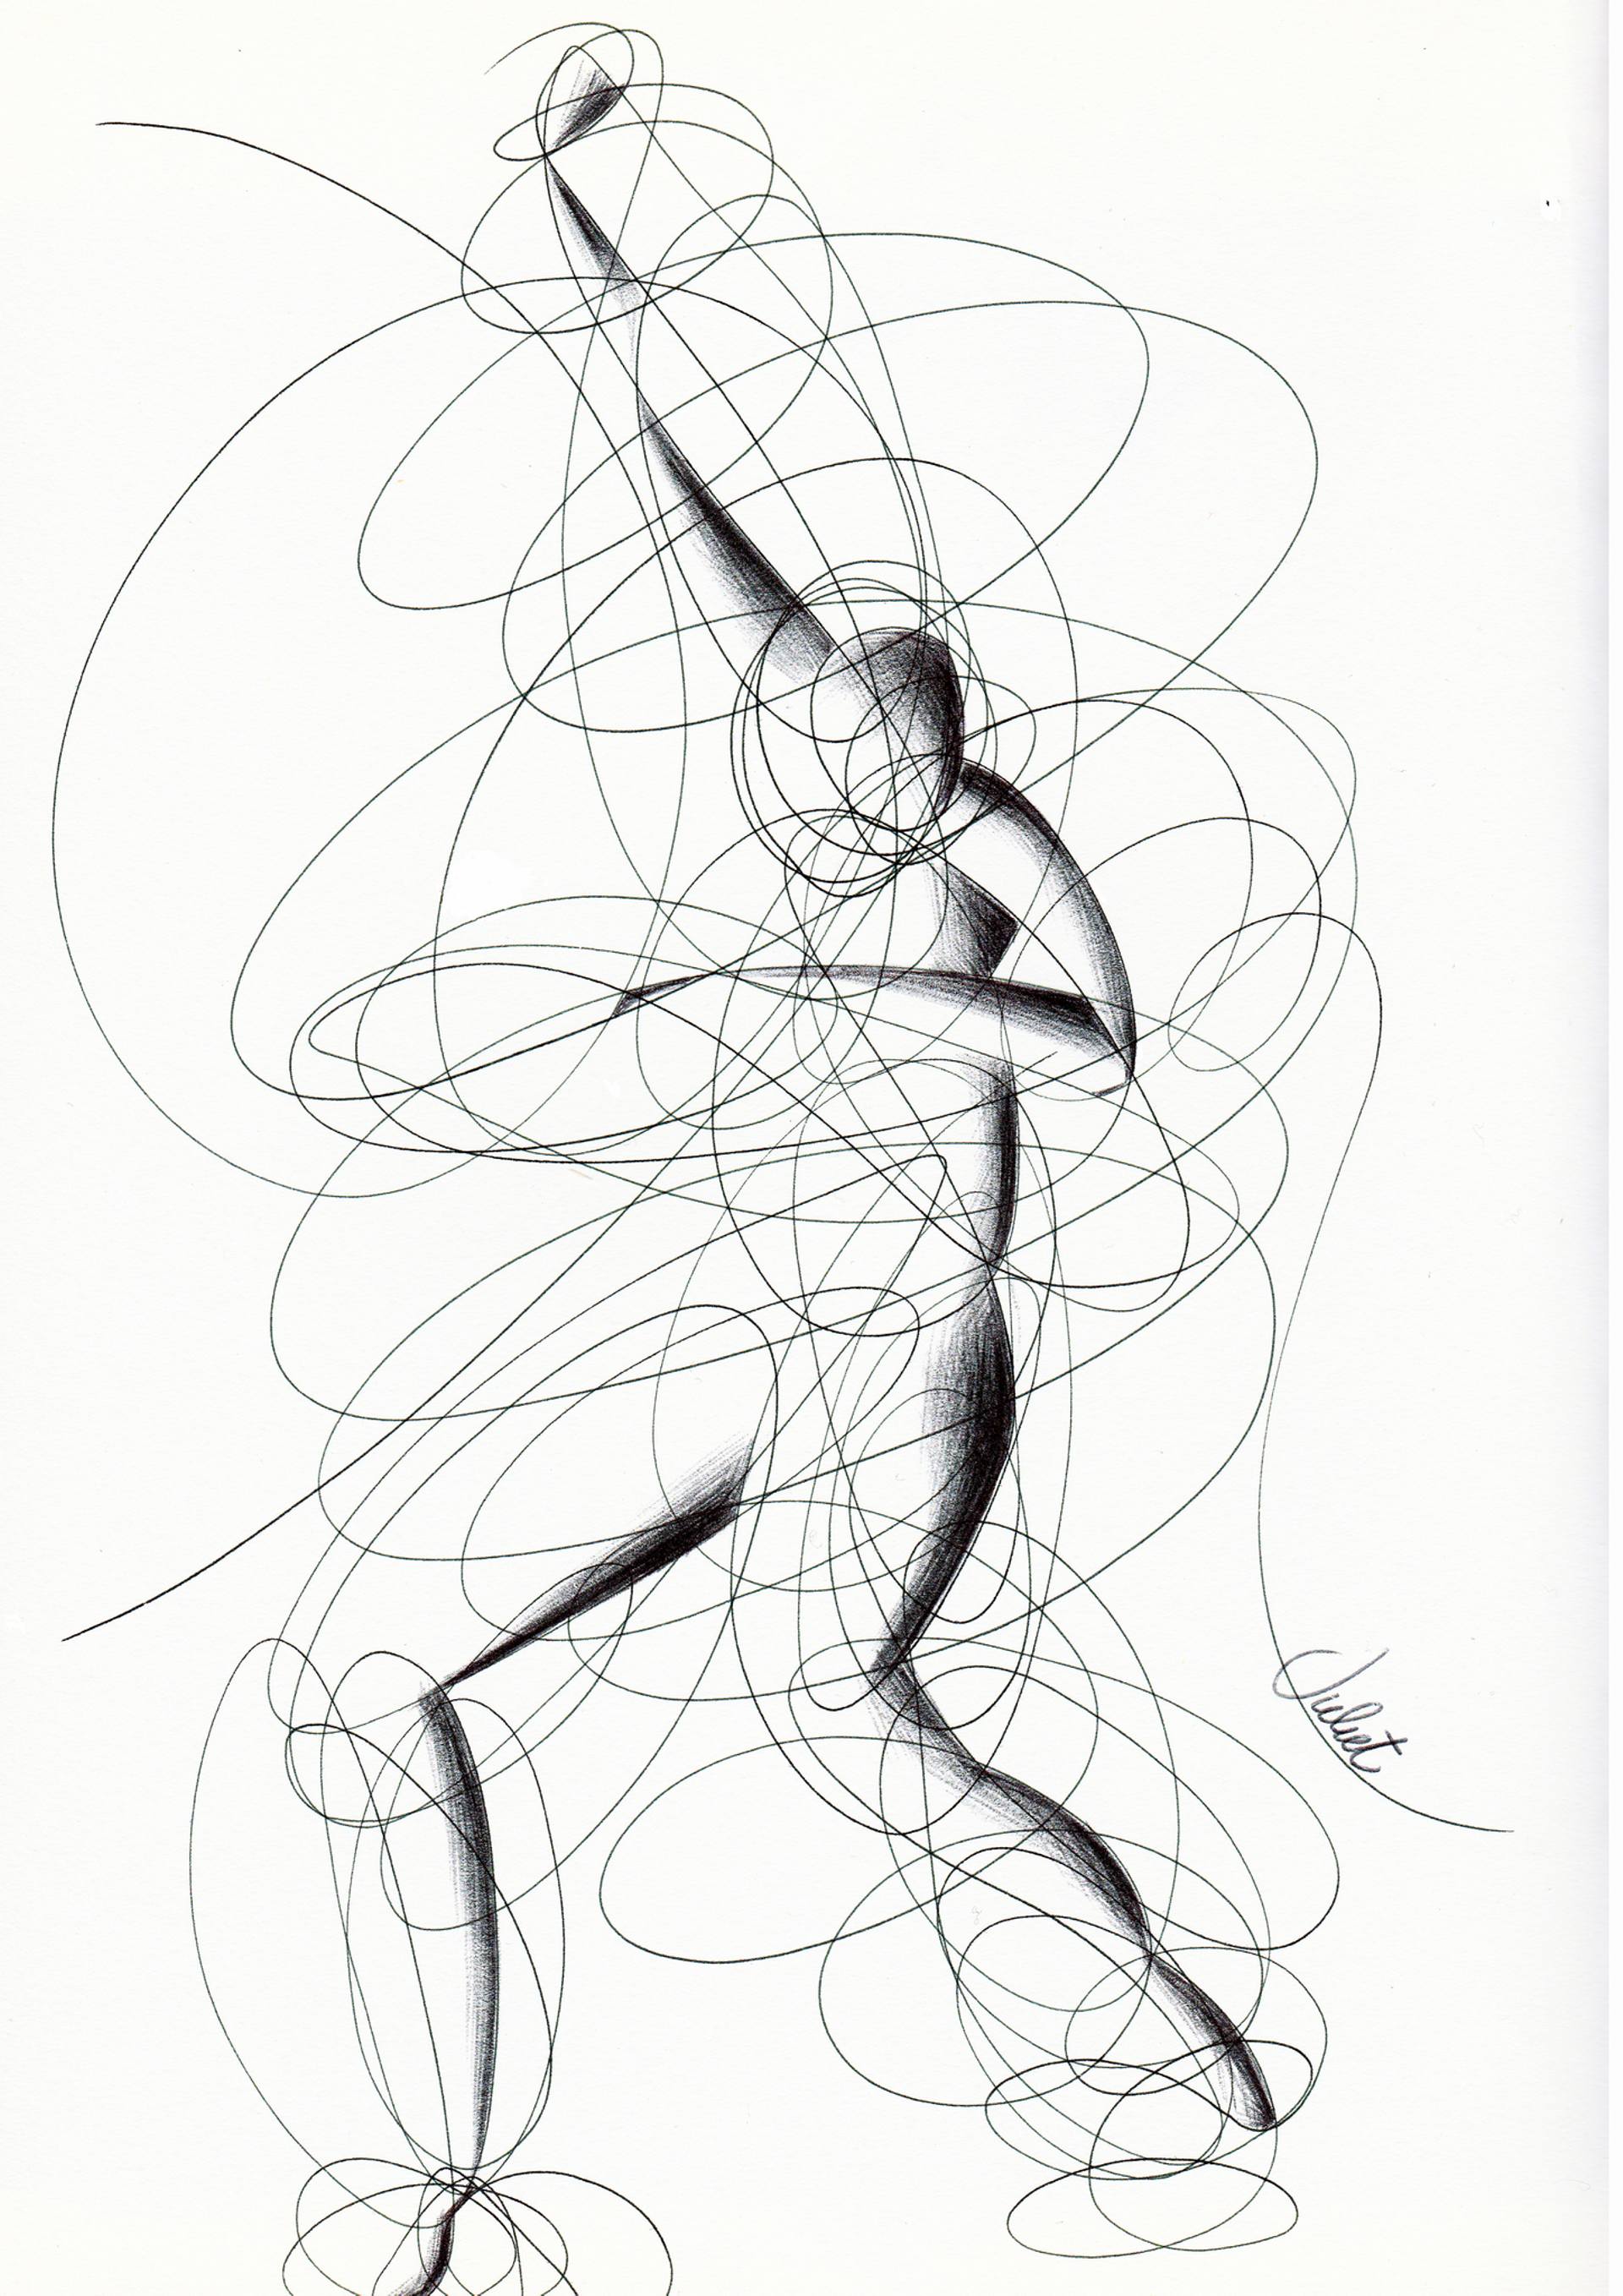 Random Line Drawing at Explore collection of